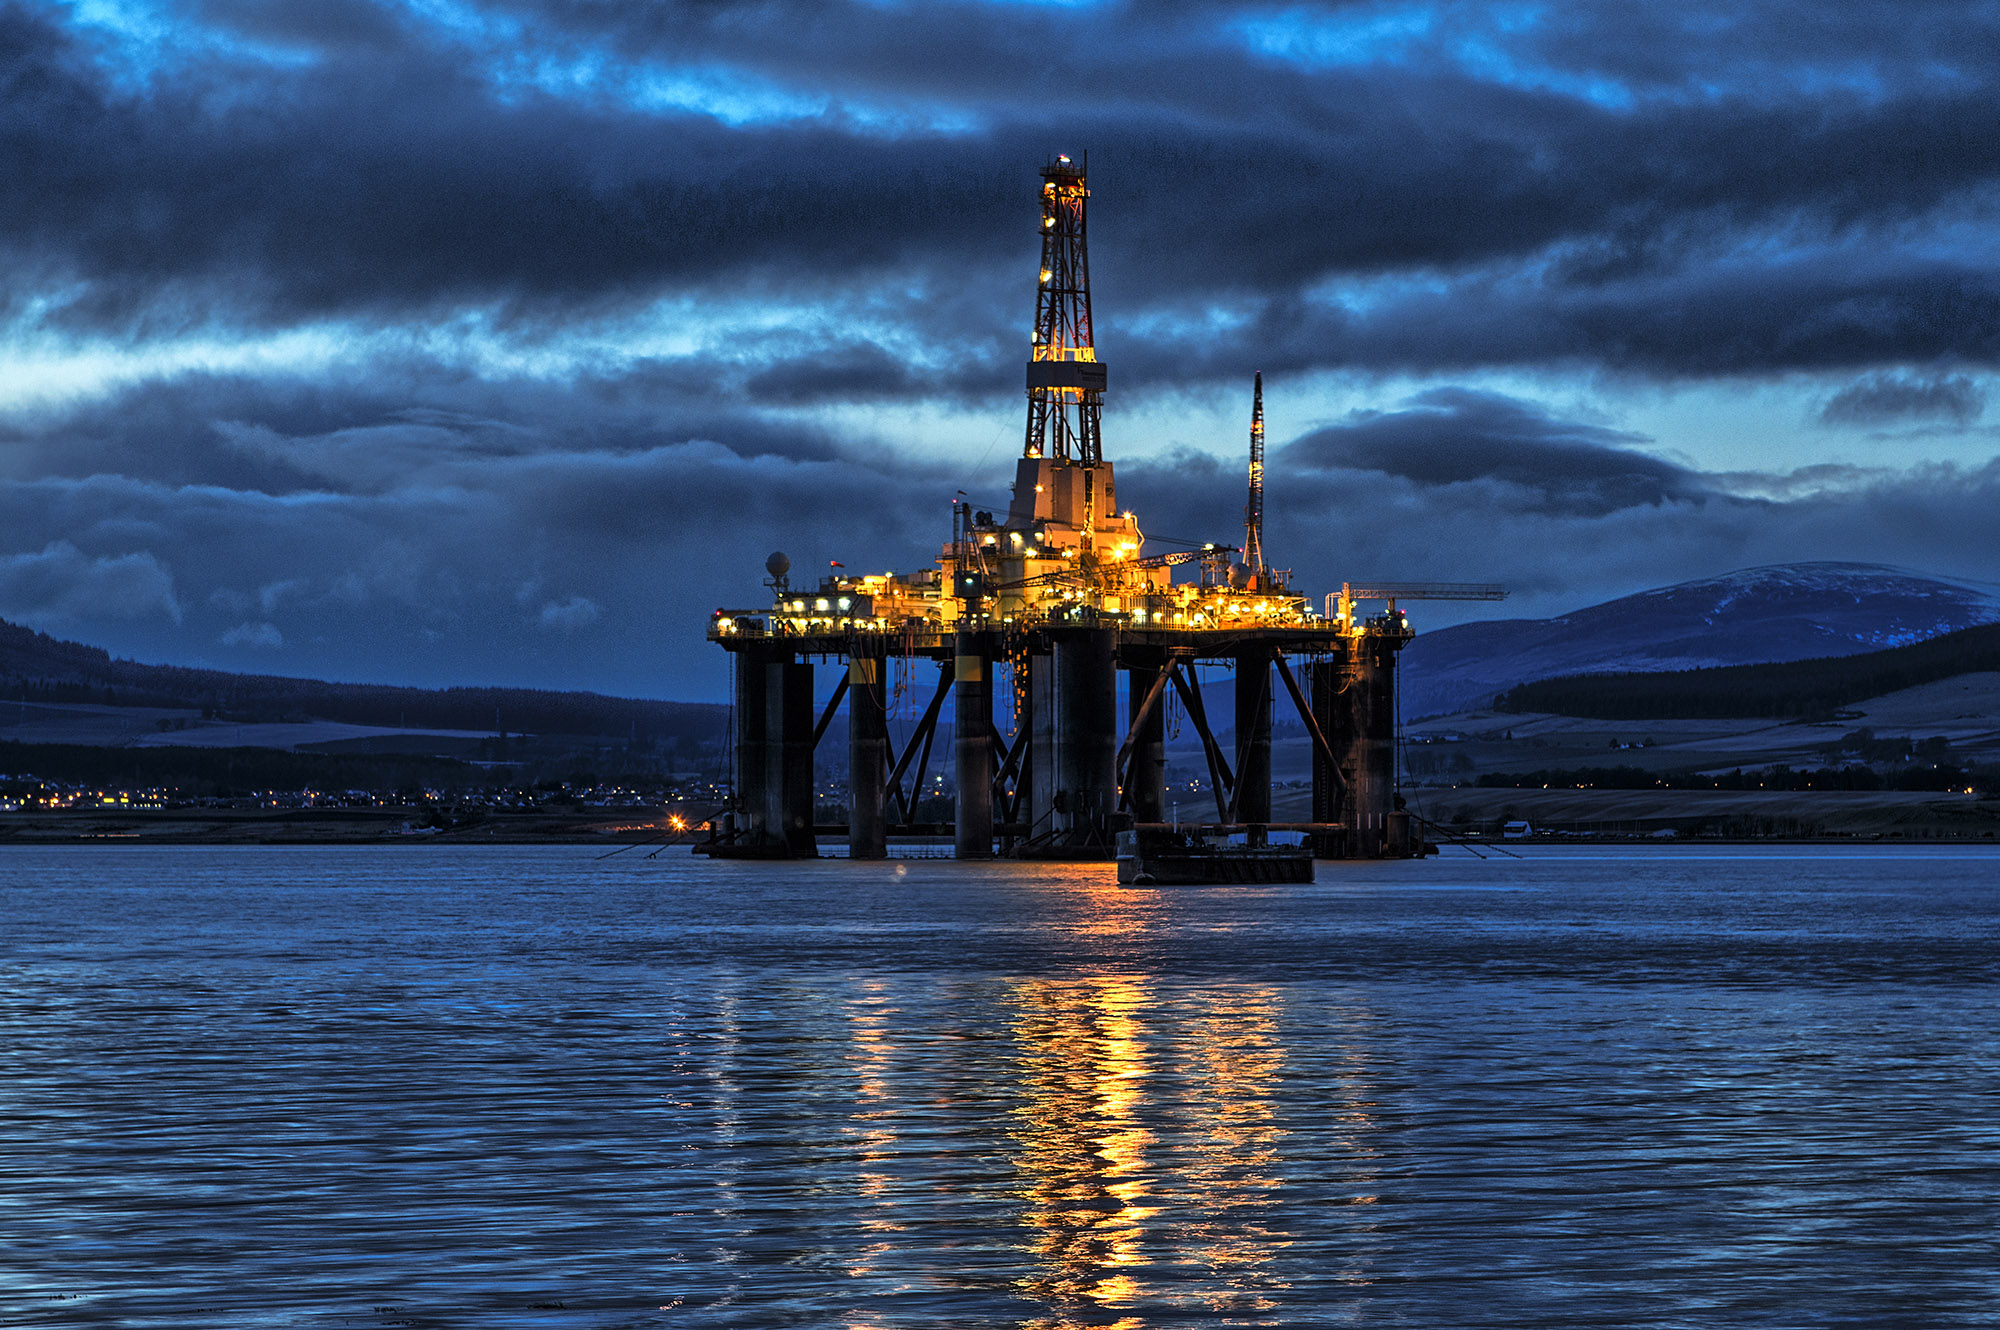 Low Light, Oilrig, Cromarty Firth